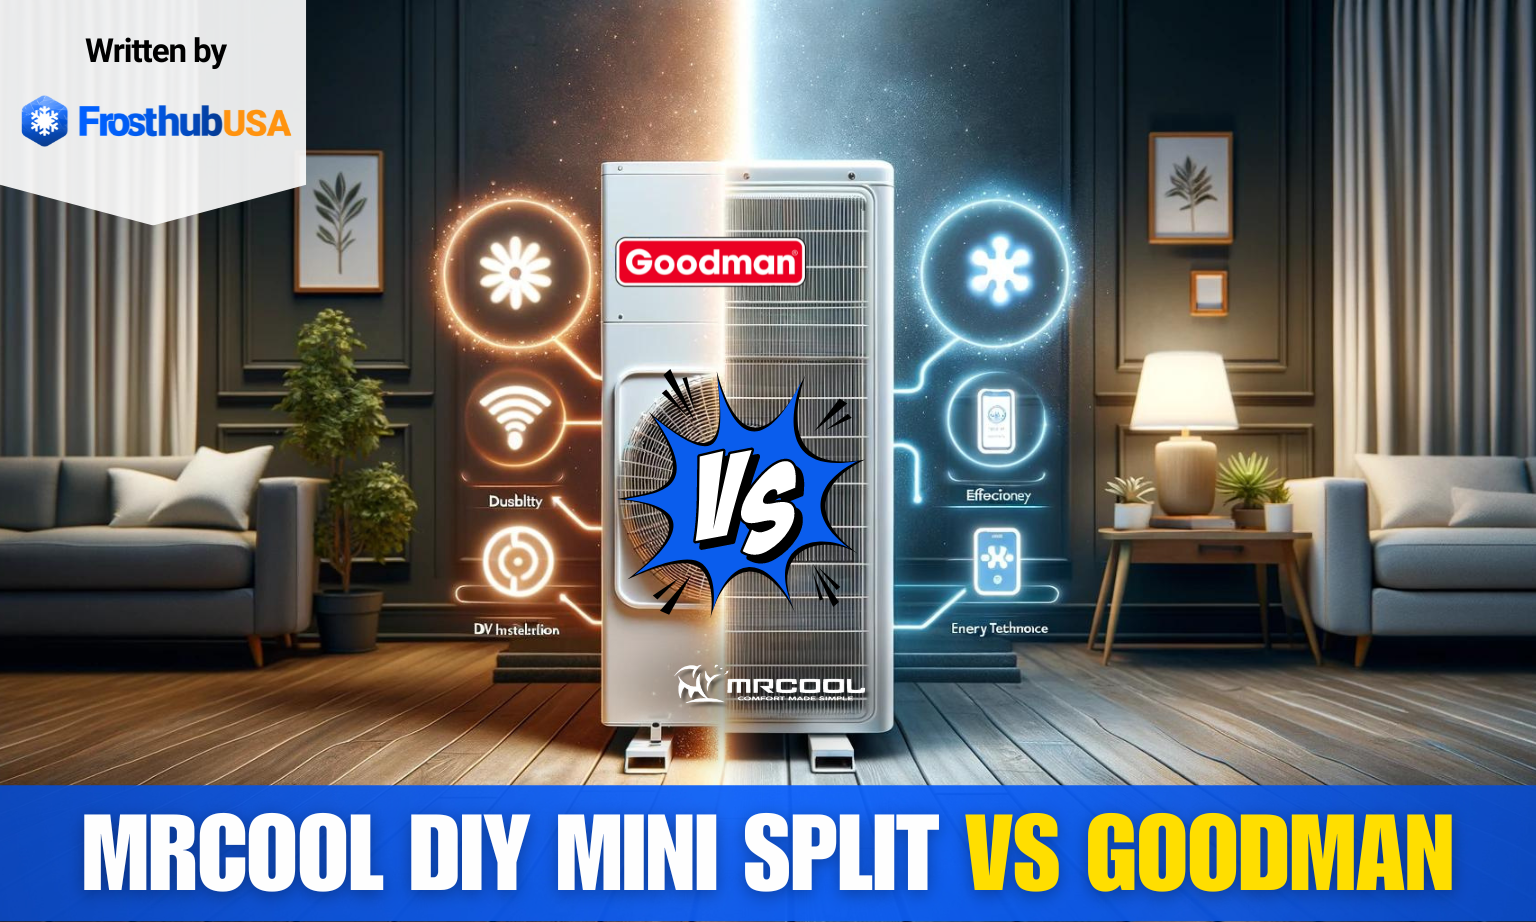 Goodman vs. MRCOOL: Which brand Is best for mini-split systems? - FrosthubUSA